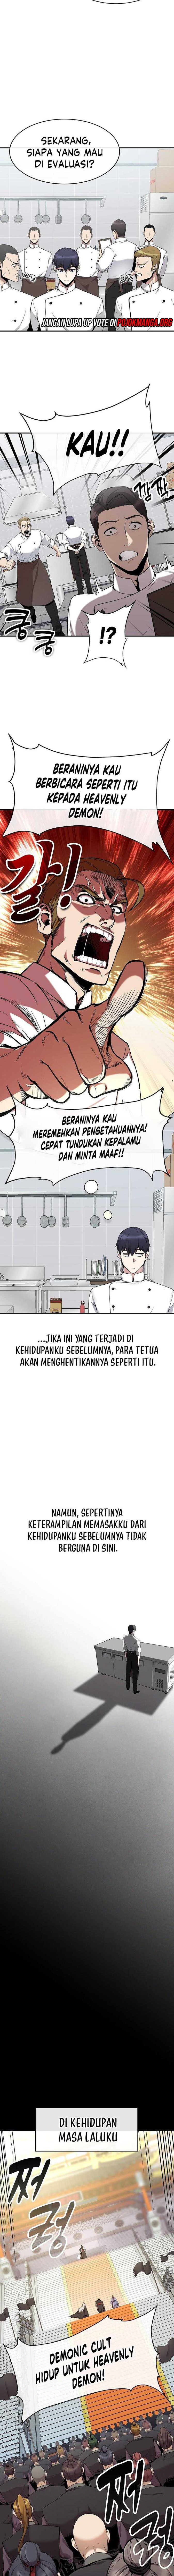 Heavenly Demon Wants to Be a Chef Chapter 01